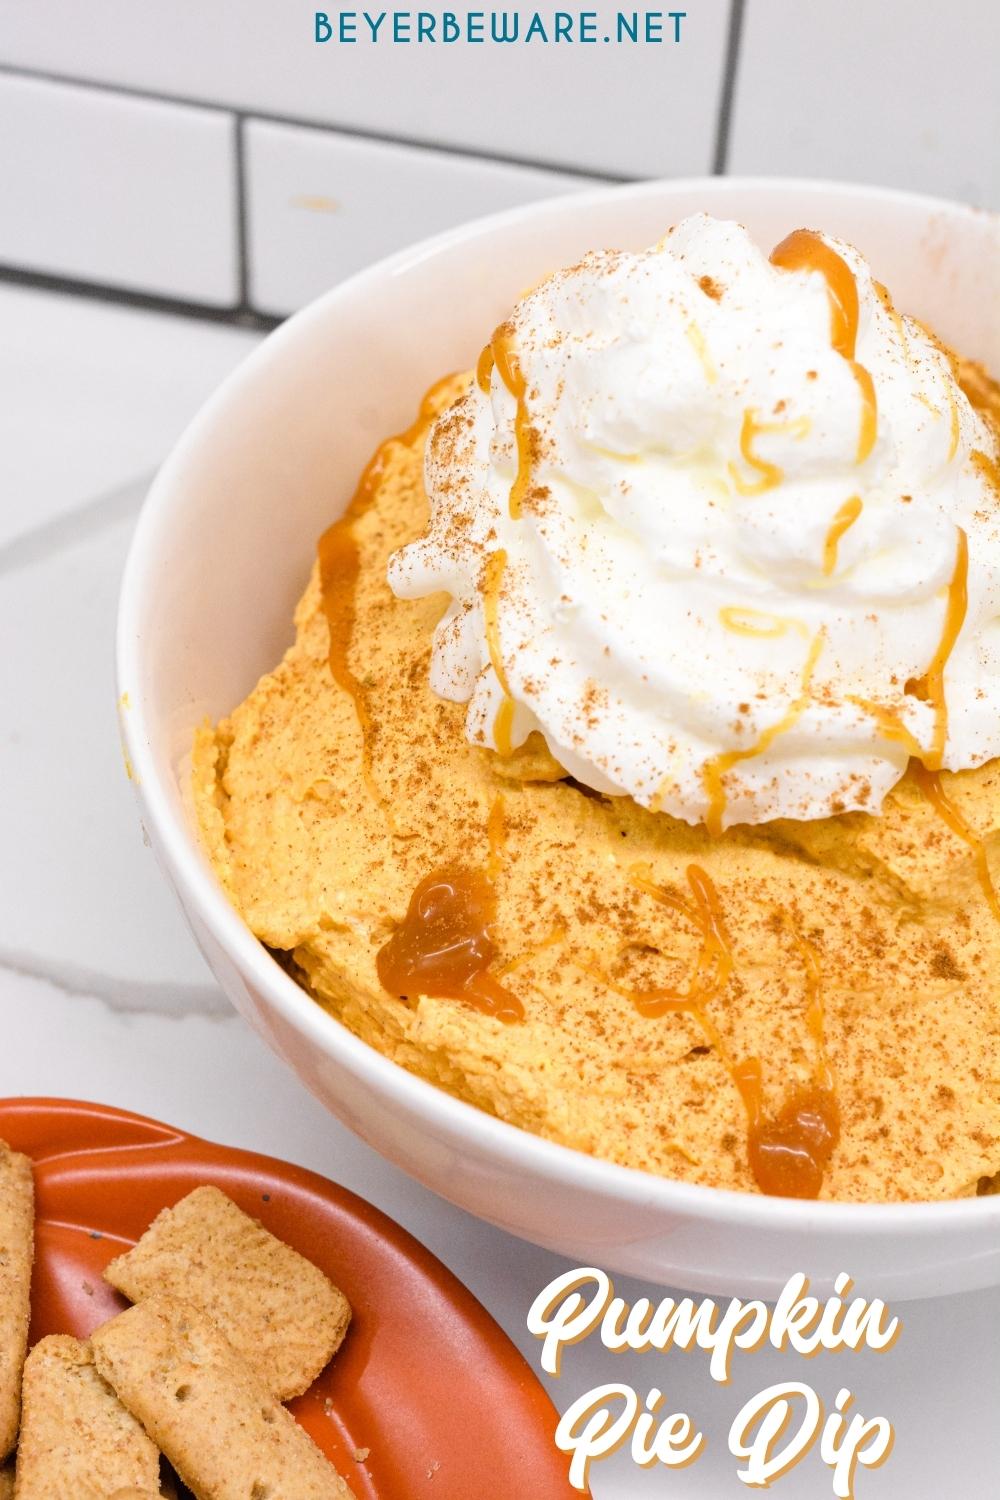 Pumpkin Fluff Dip is a simple recipe for the creamiest pumpkin dip made with whipped topping, canned pumpkin, vanilla pudding, and pumpkin pie spice.